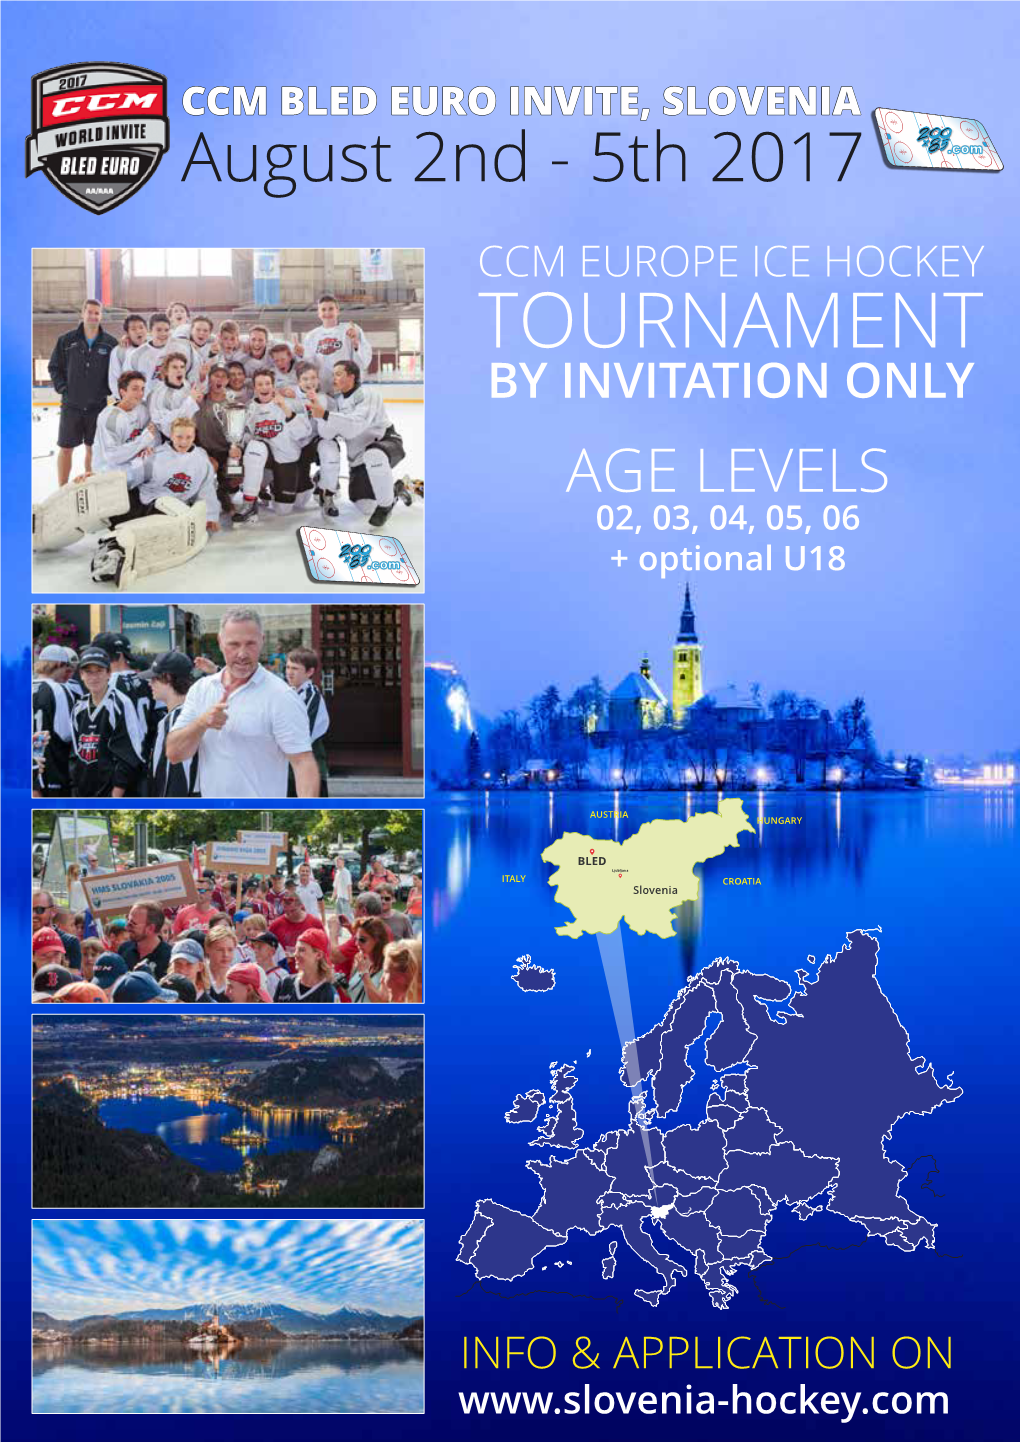 TOURNAMENT by INVITATION ONLY AGE LEVELS 02, 03, 04, 05, 06 + Optional U18